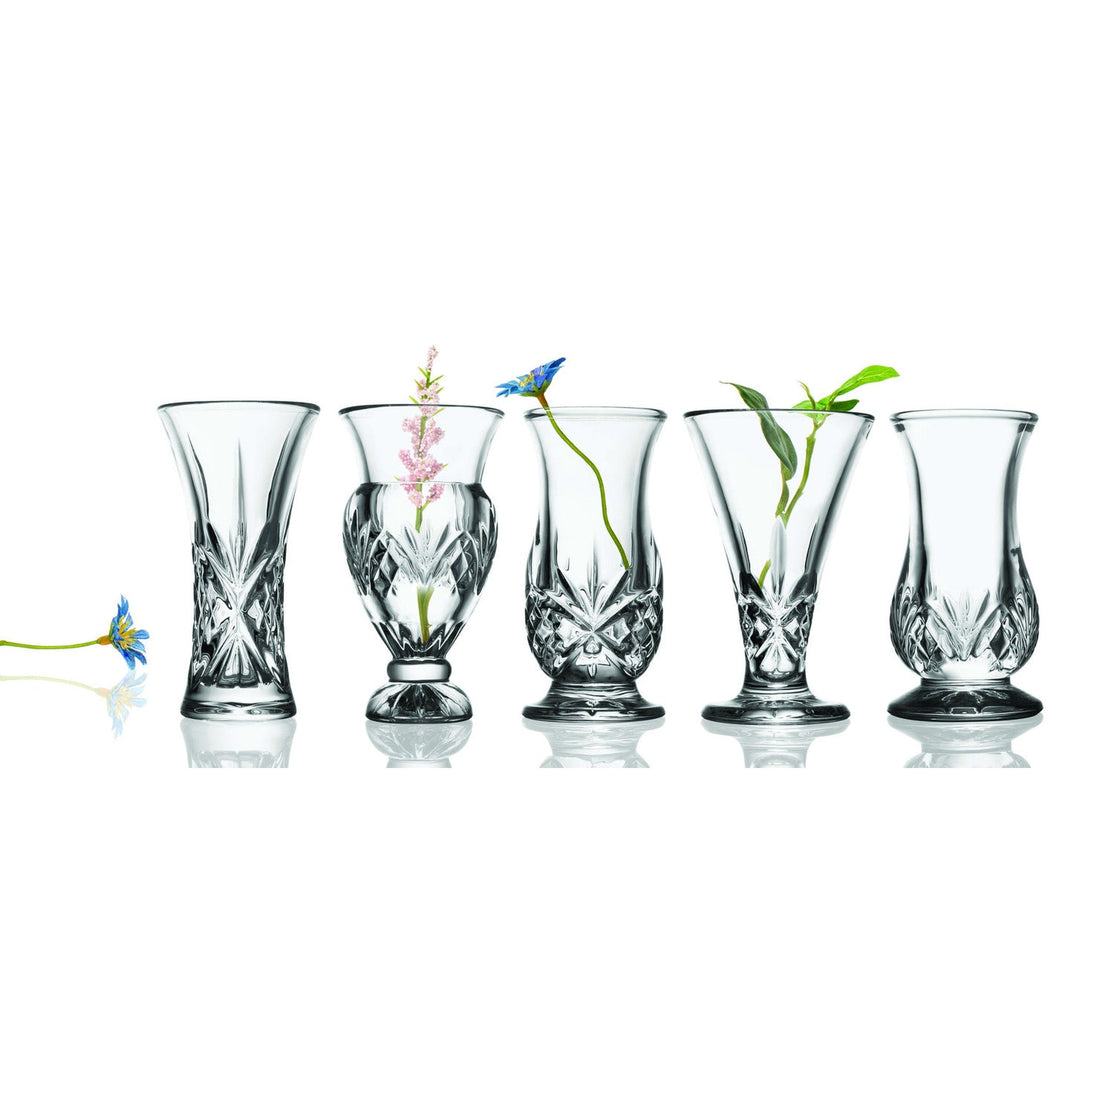 A row of Dublin Crystal 5 Piece Bud Vase Set by Godinger with fresh flowers - perfect for adding a touch of beauty to any space.